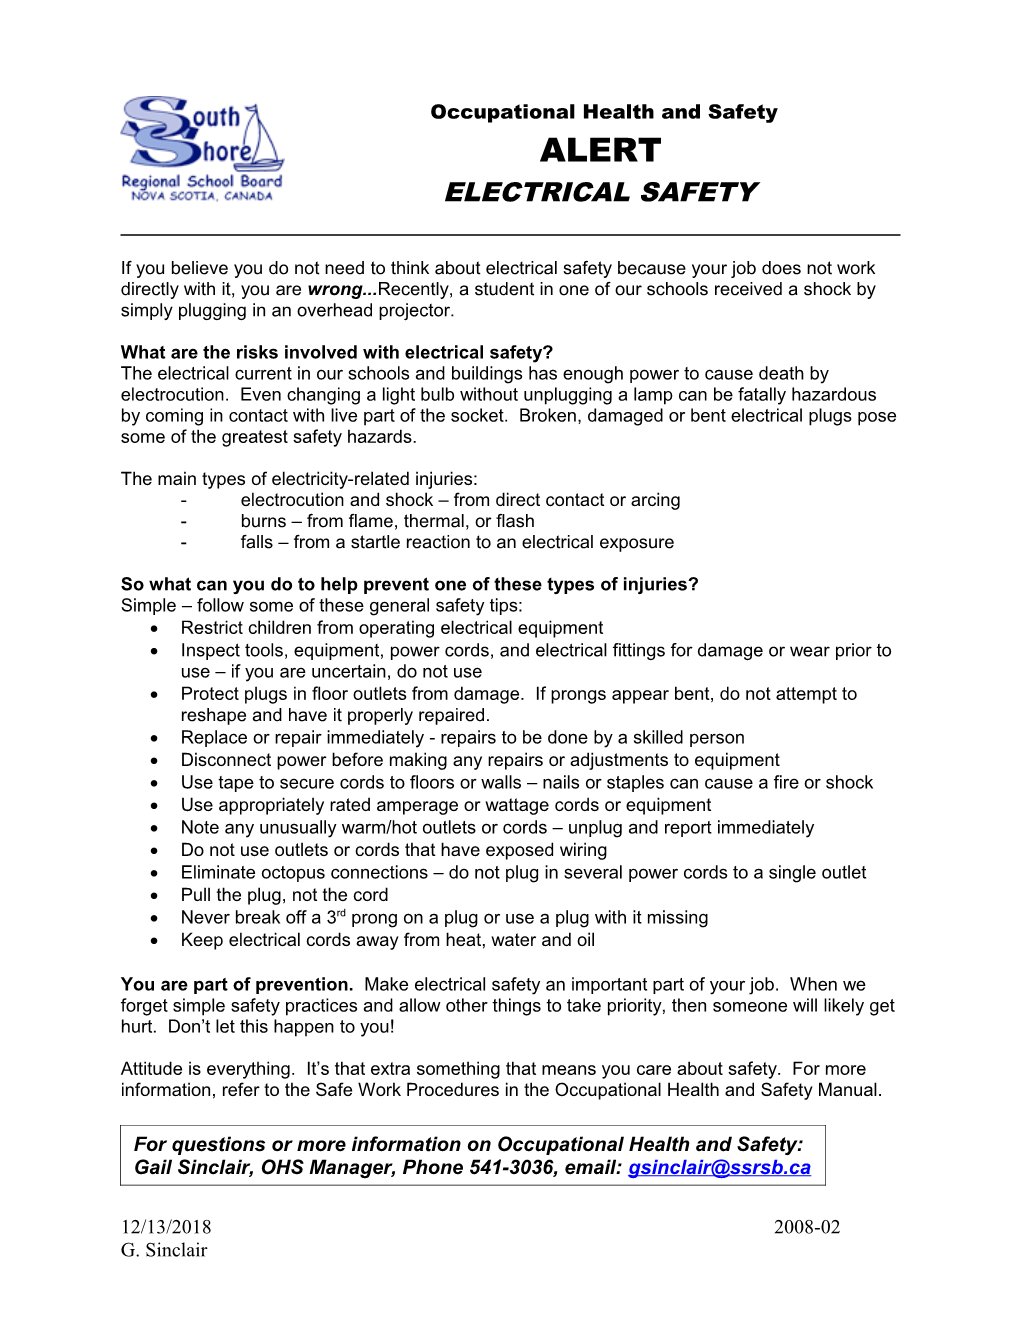 What Are the Risks Involved with Electrical Safety?